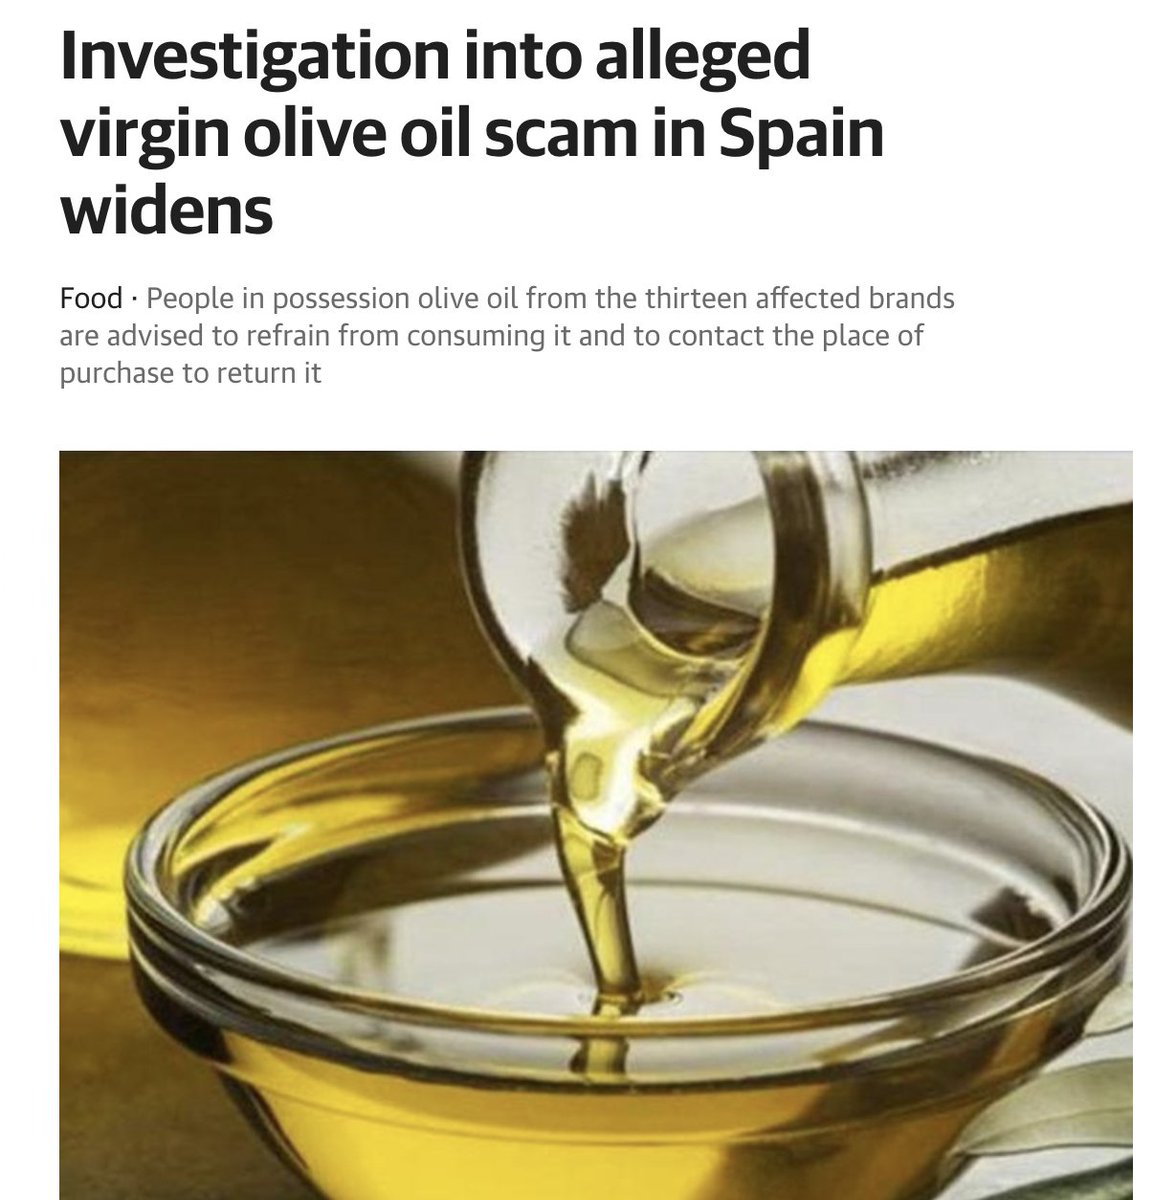 according to some reports, up to 70% of olive oil is fake, adulterated with cheap soybean and sunflower oils

just cook with beef tallow, coconut oil or butter